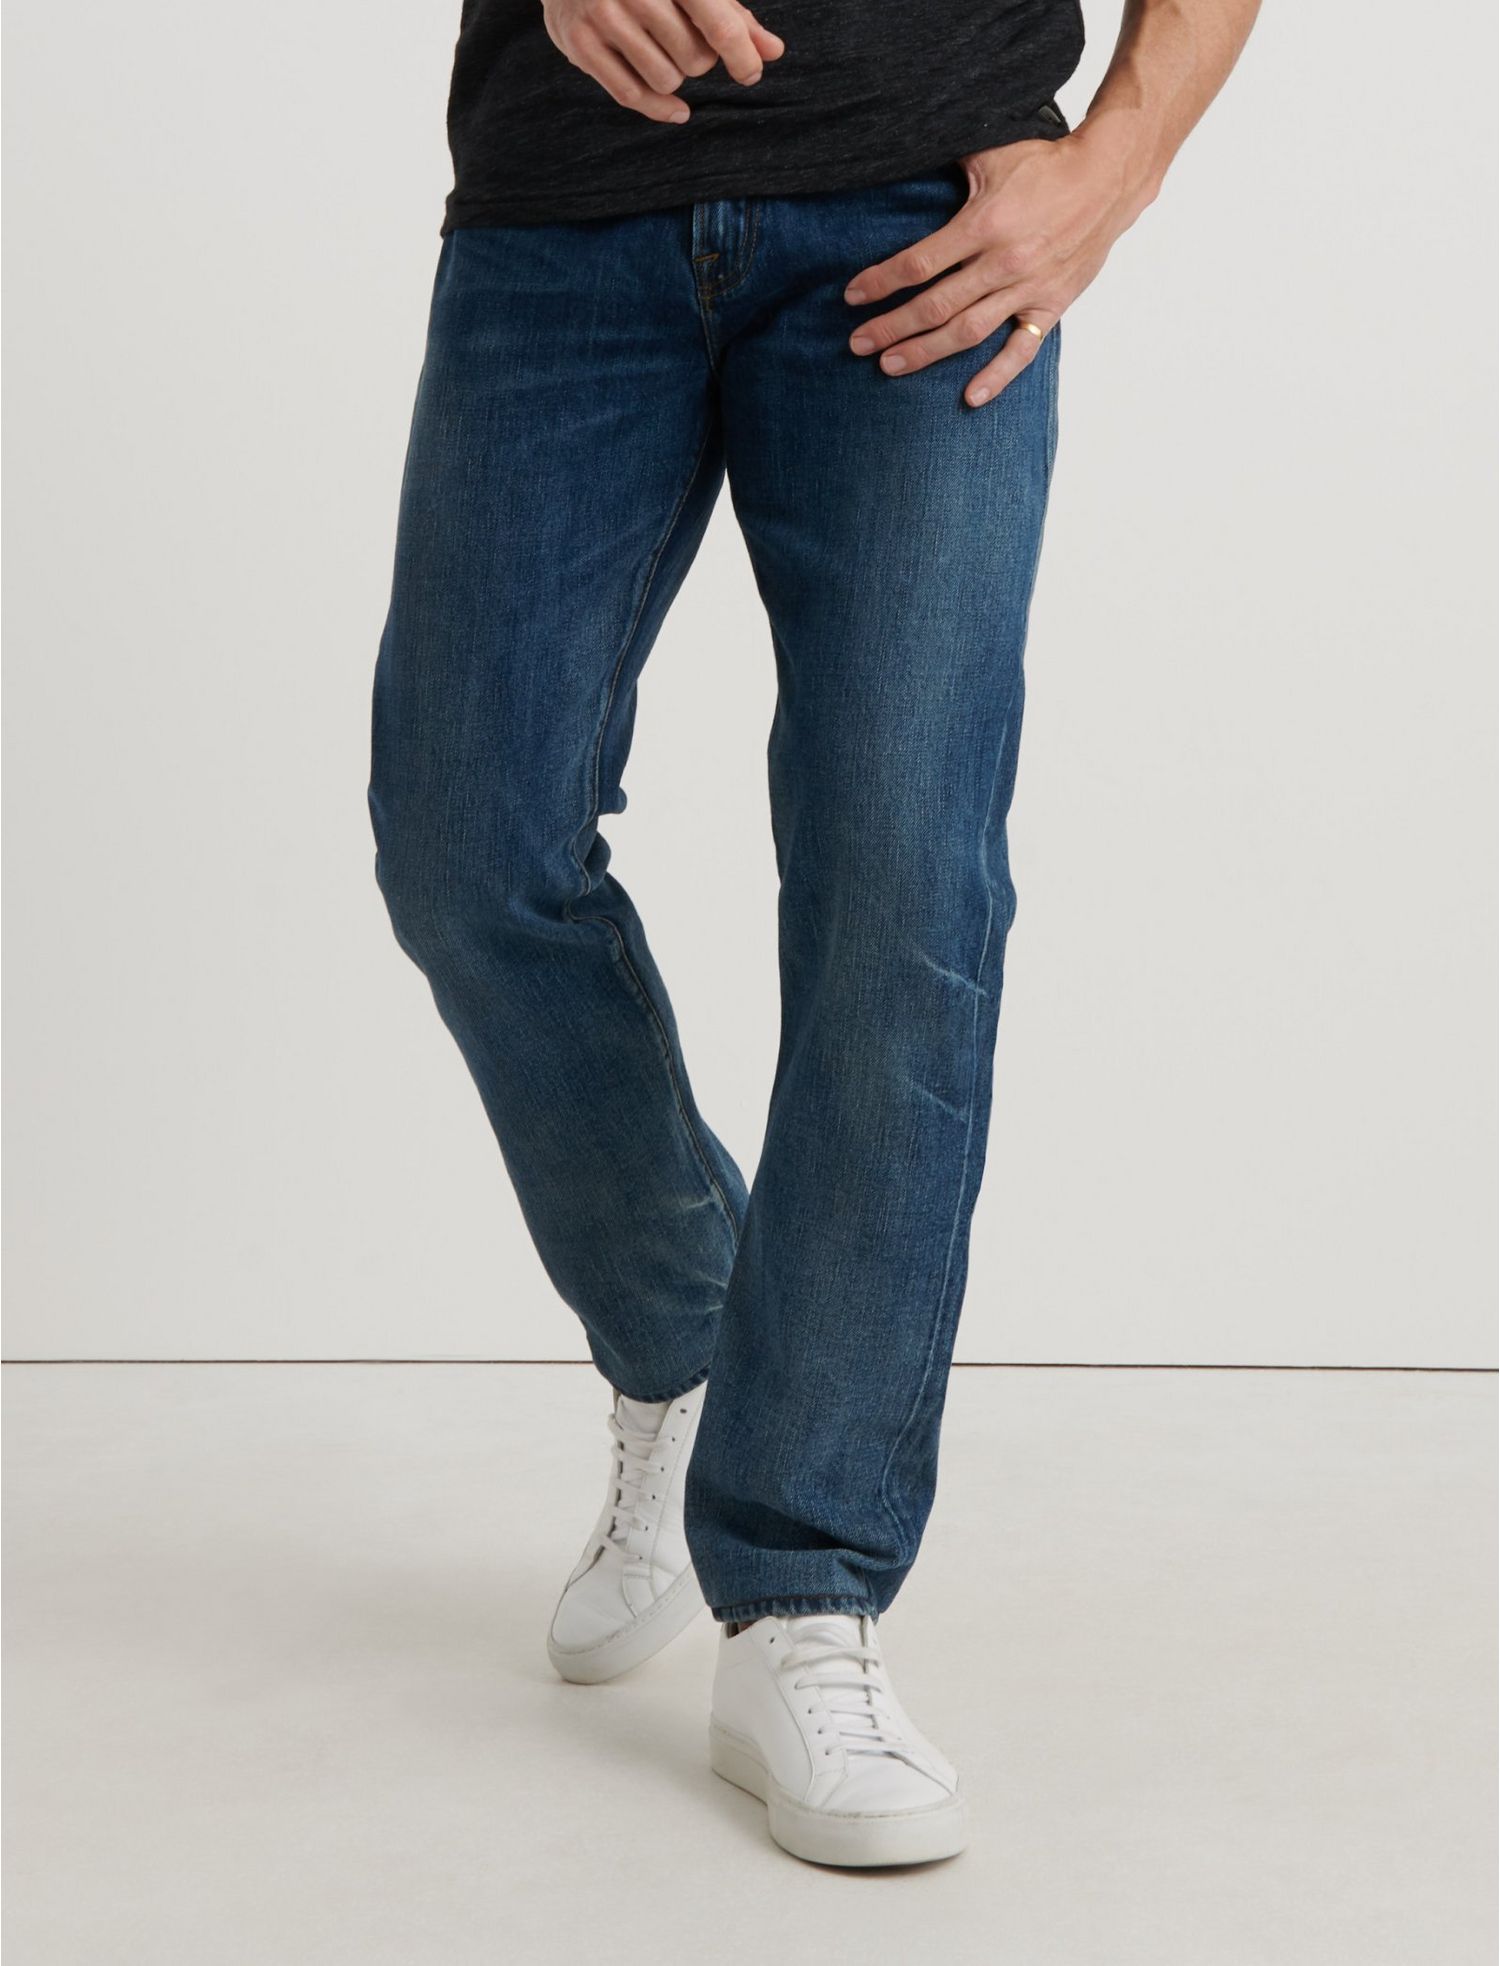 lucky brand 121 jeans